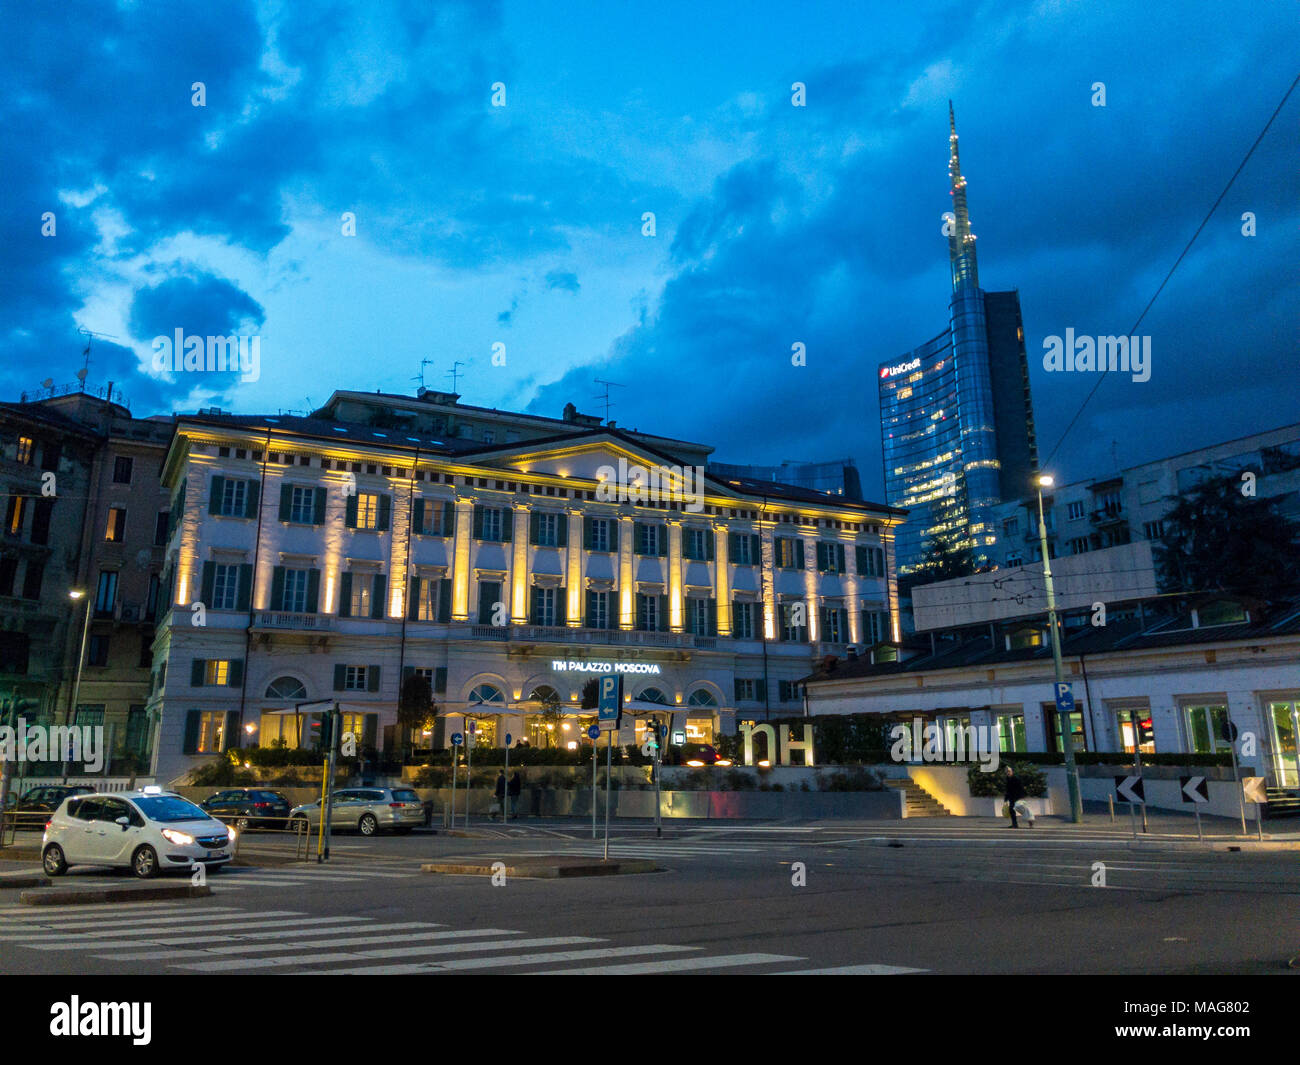 Milan, Unicredit Tower and NH Palazzo Moscova, hotel, corner Melchiorre Gioia street and Viale Monte Grappa. 03/30/2018. City skyline. Italy Stock Photo